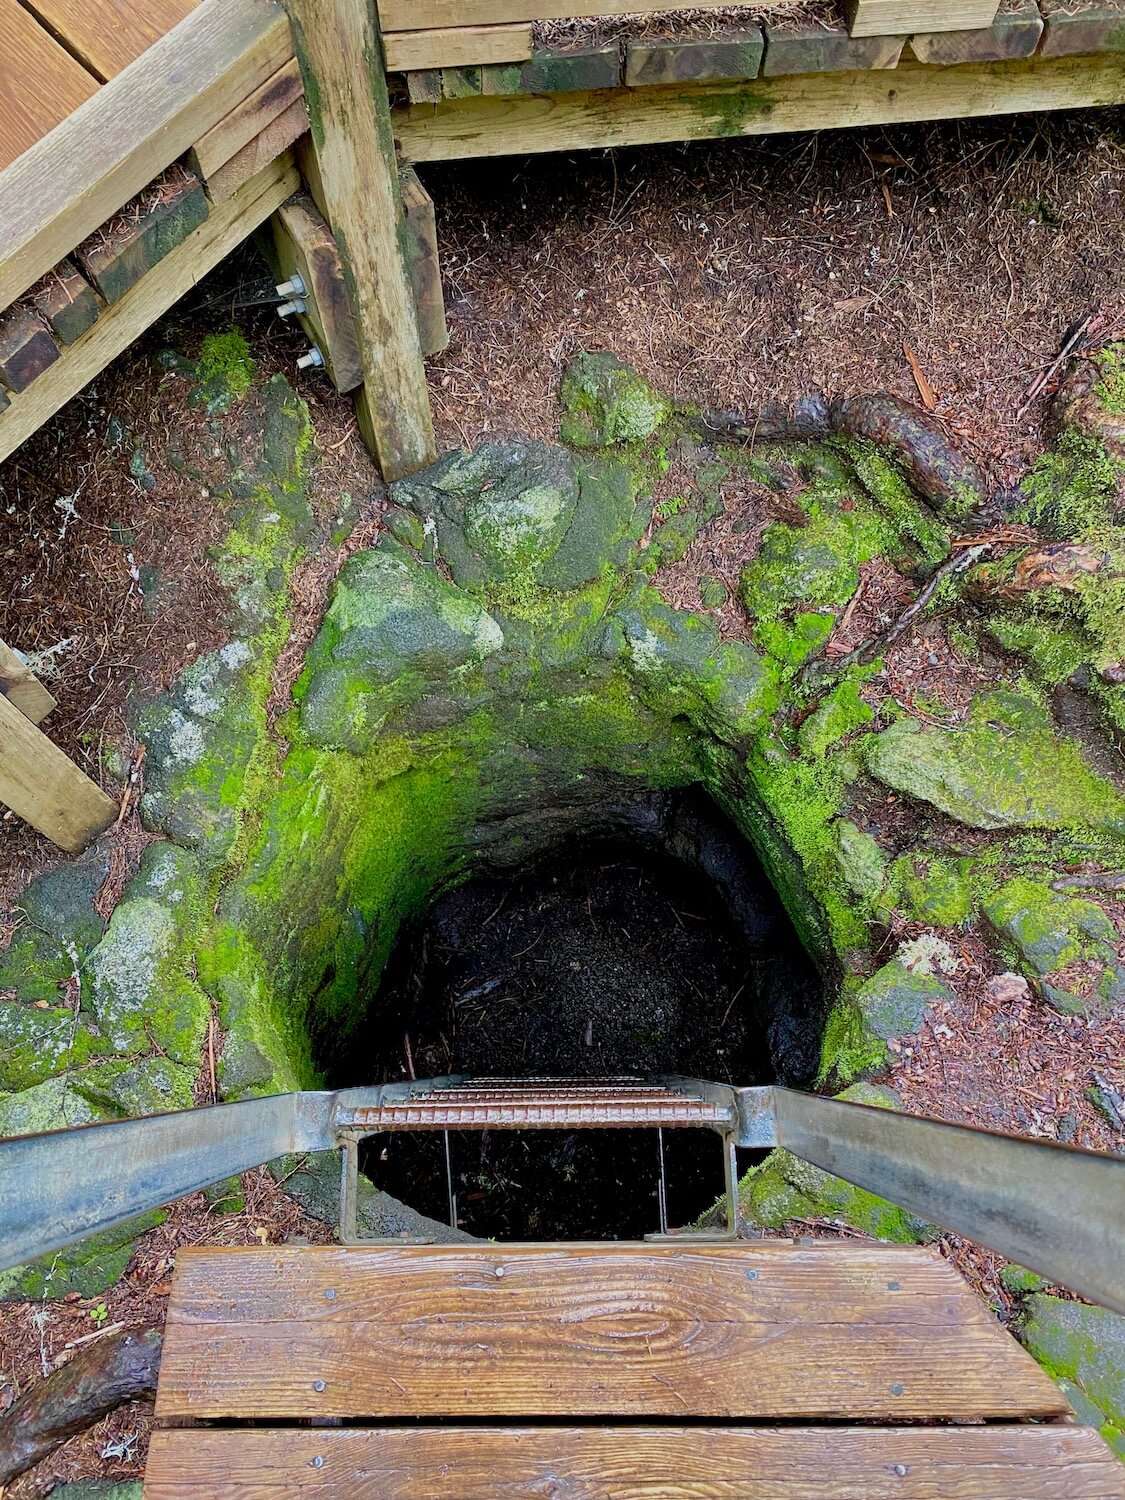 A great activity on a visit to Mount St. Helens is a lava tube created by a tree.  This is an iron ladder leading into a round hole made from a tree covered in lava that burned out many thousands of years ago.  It is dark in the tube, which is surrounded by lime green moss.  